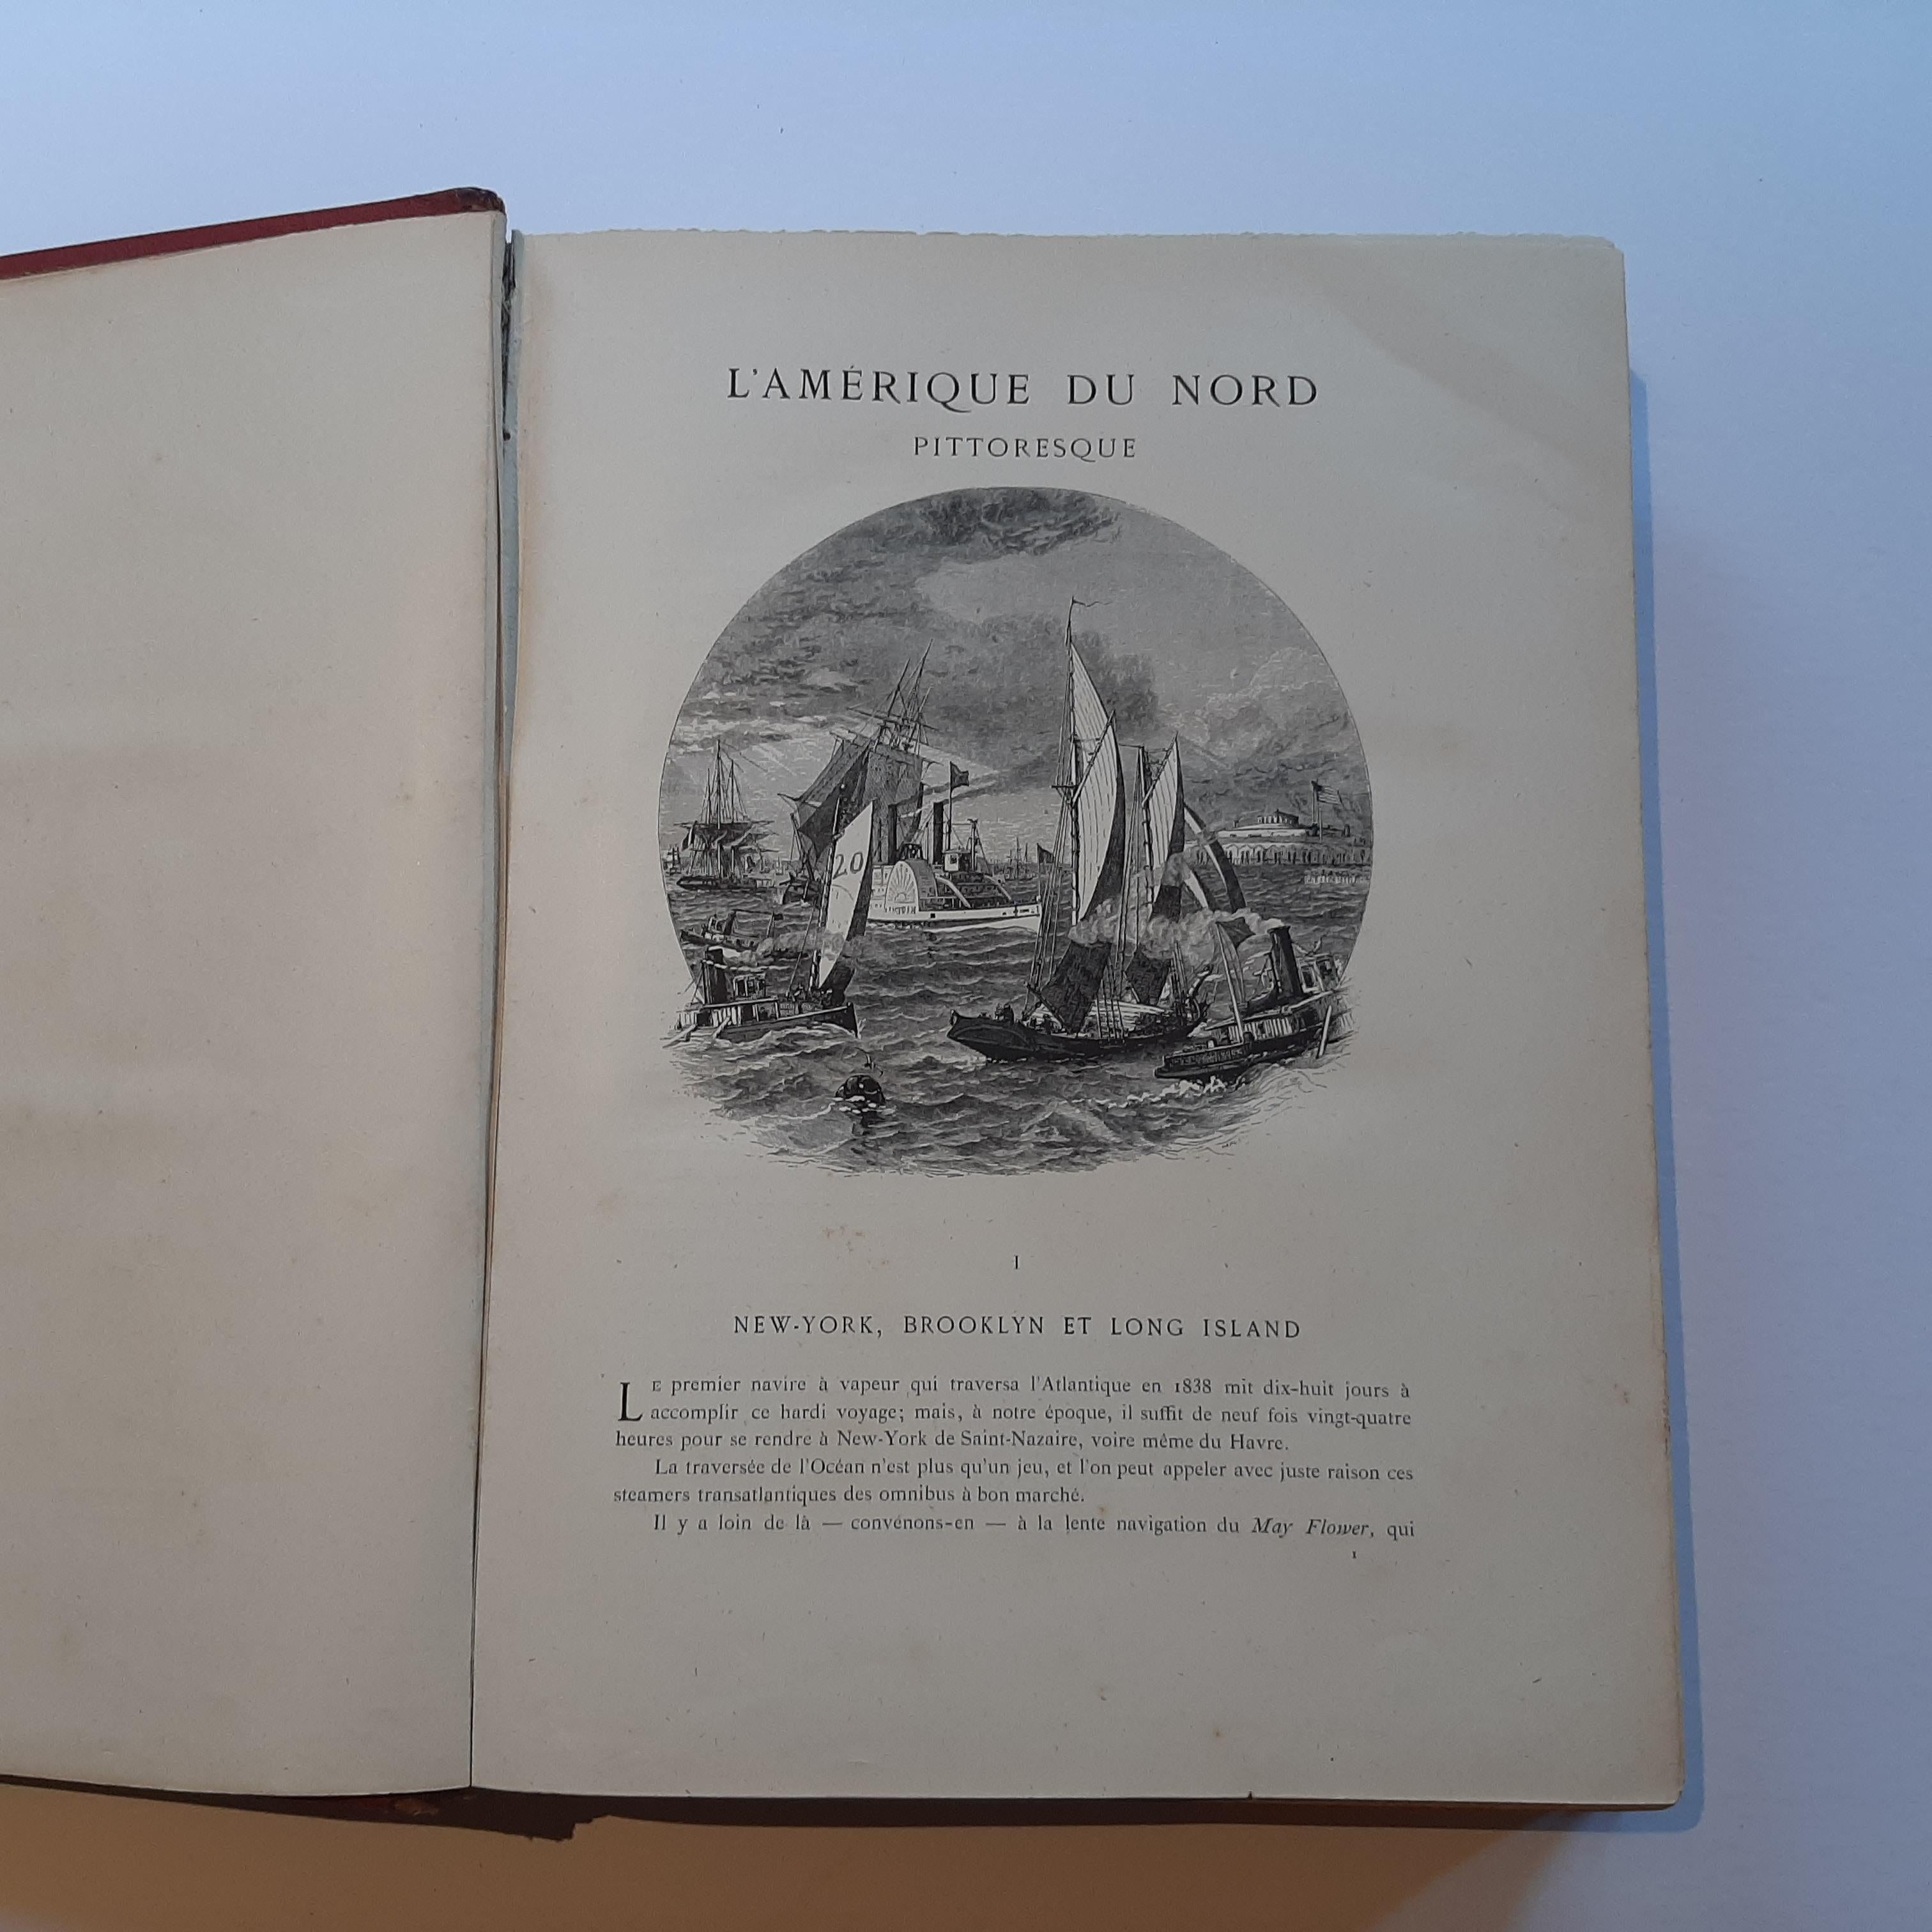 L'Amérique du Nord pittoresque by Quantin & Decaux. A 19th century exploration of the landscape of the United States and Canada, with numerous full page black and white illustrations. It is beautifully bound in red leather with gilt edged pages.